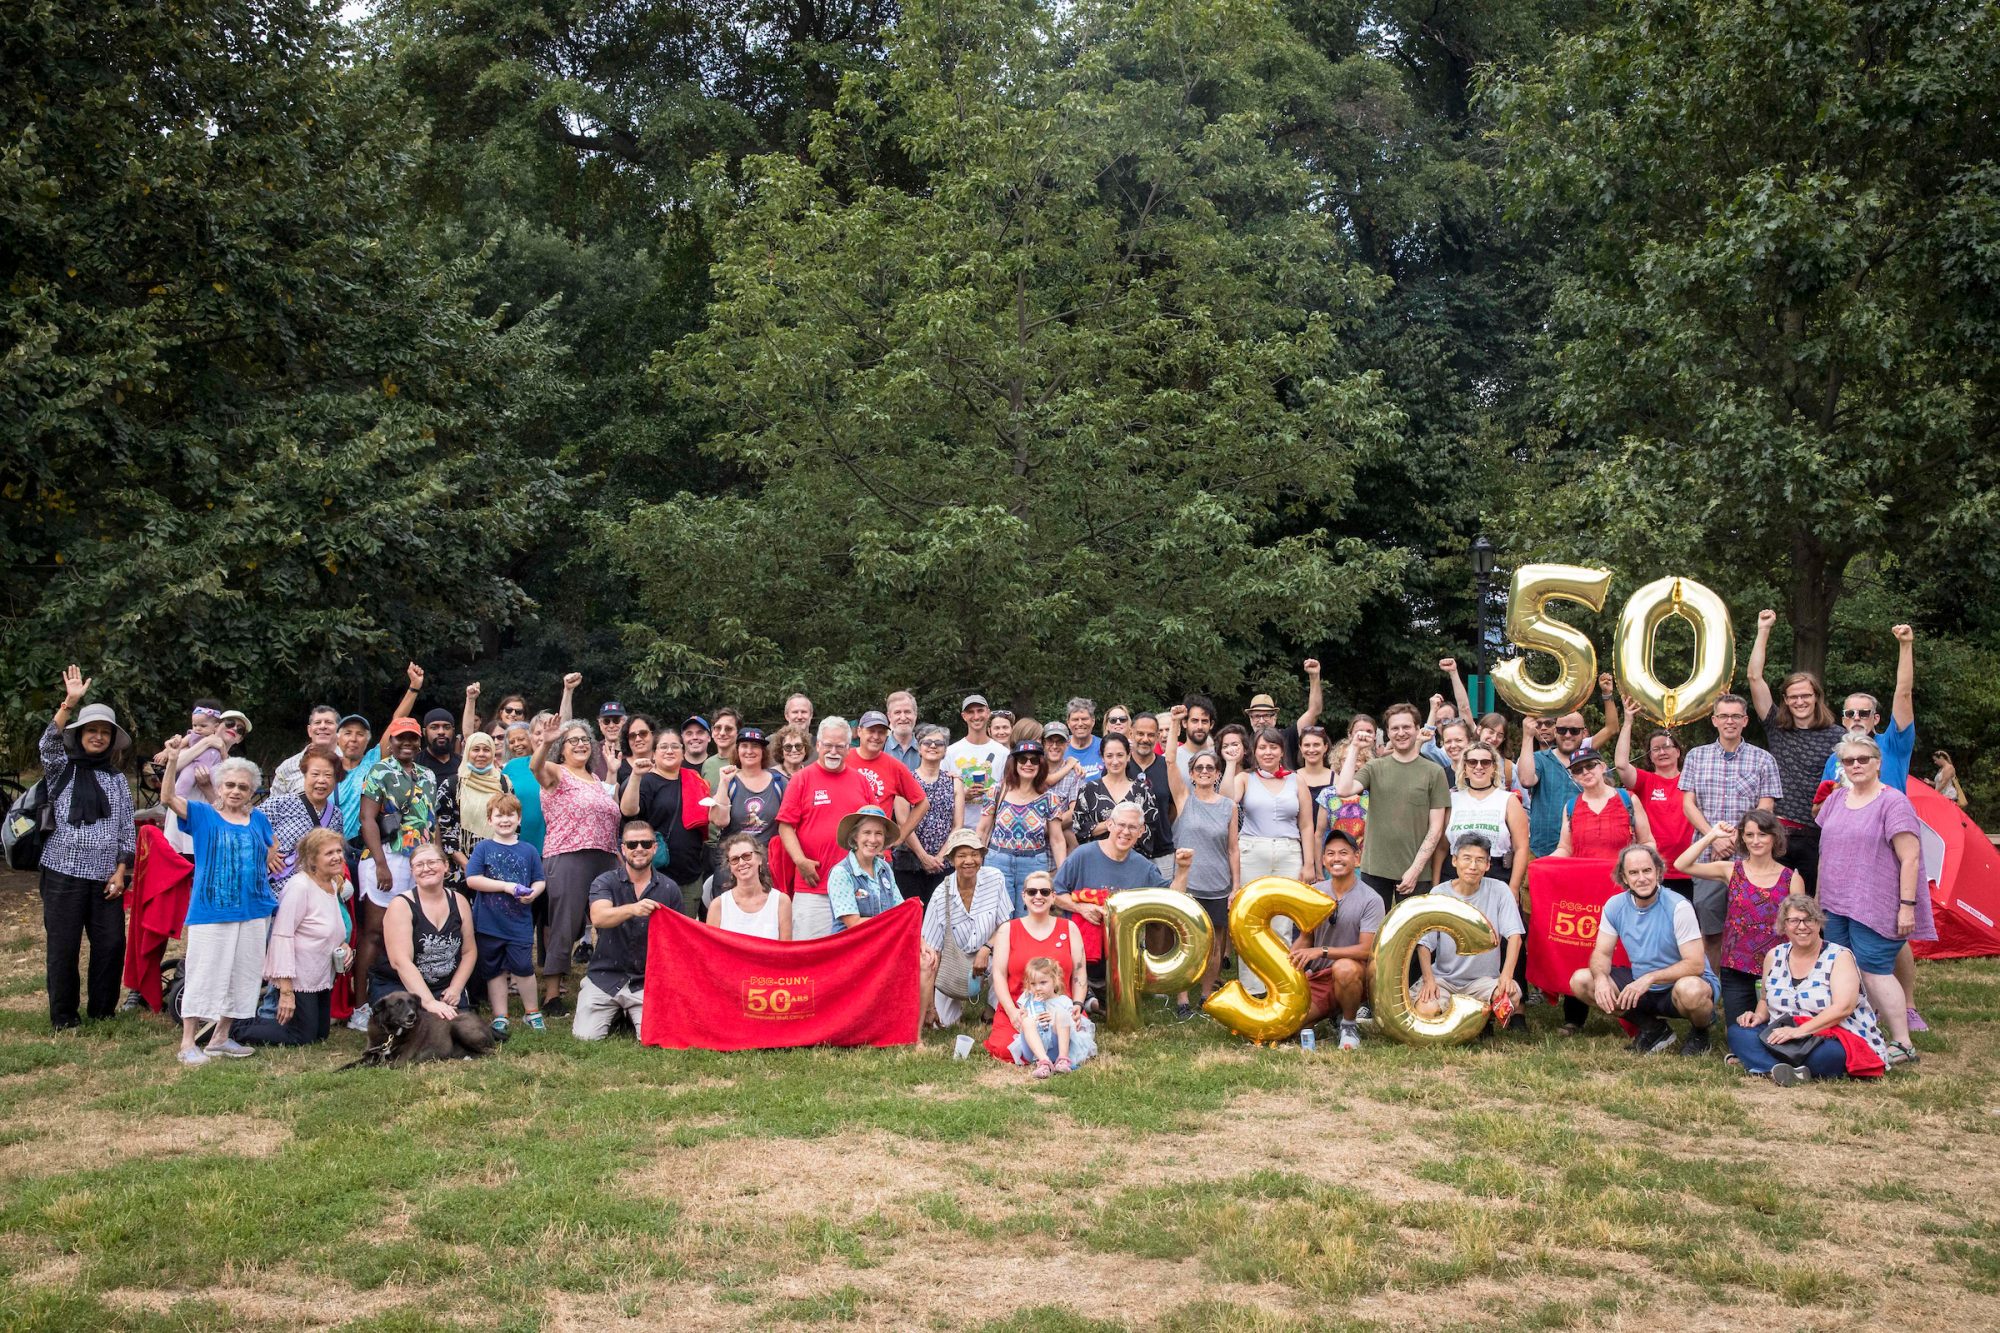 Members who attended PSC's 50th Anniversary Picnic